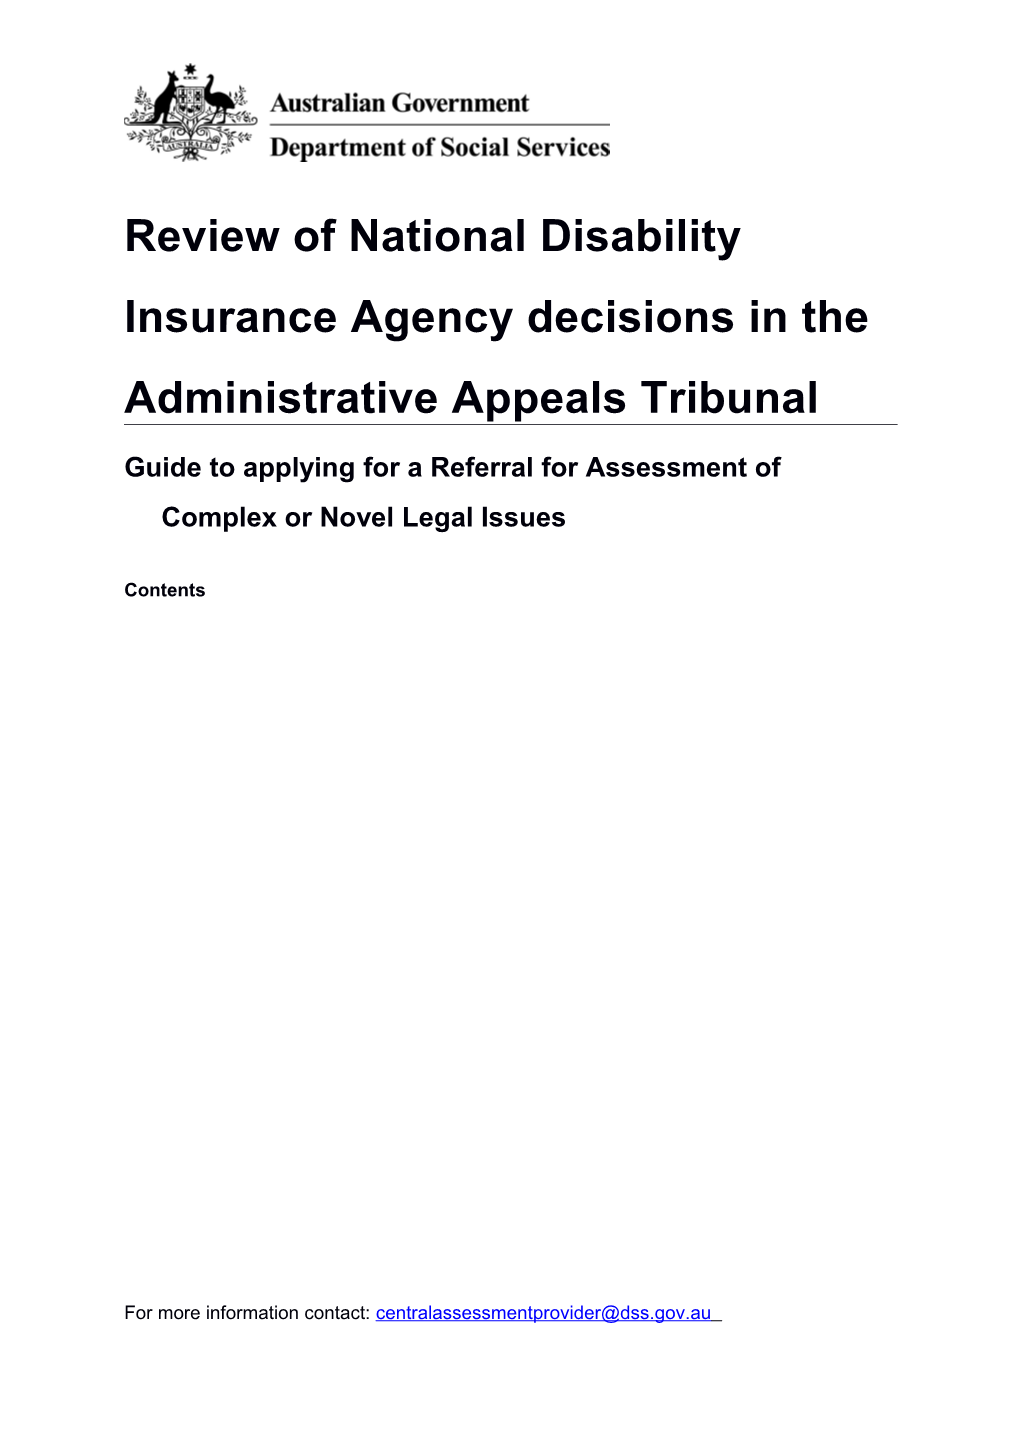 Guide to Applying for a Referral for Assessment of Complex Or Novel Legal Issues